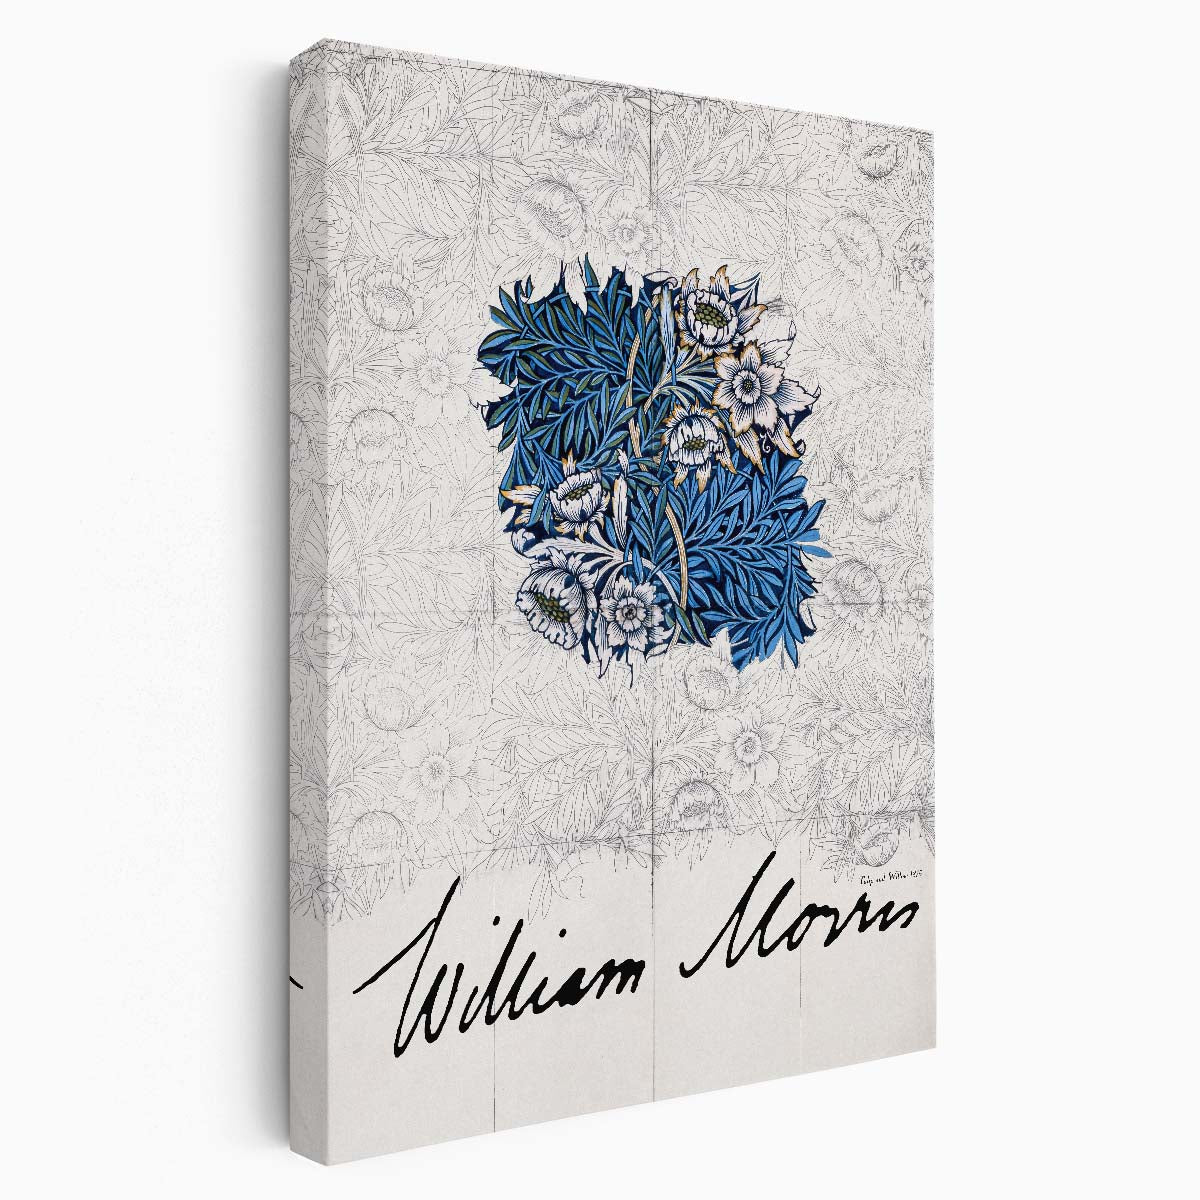 William Morris Vintage Tulip & Willow Botanical Illustration Poster by Luxuriance Designs, made in USA